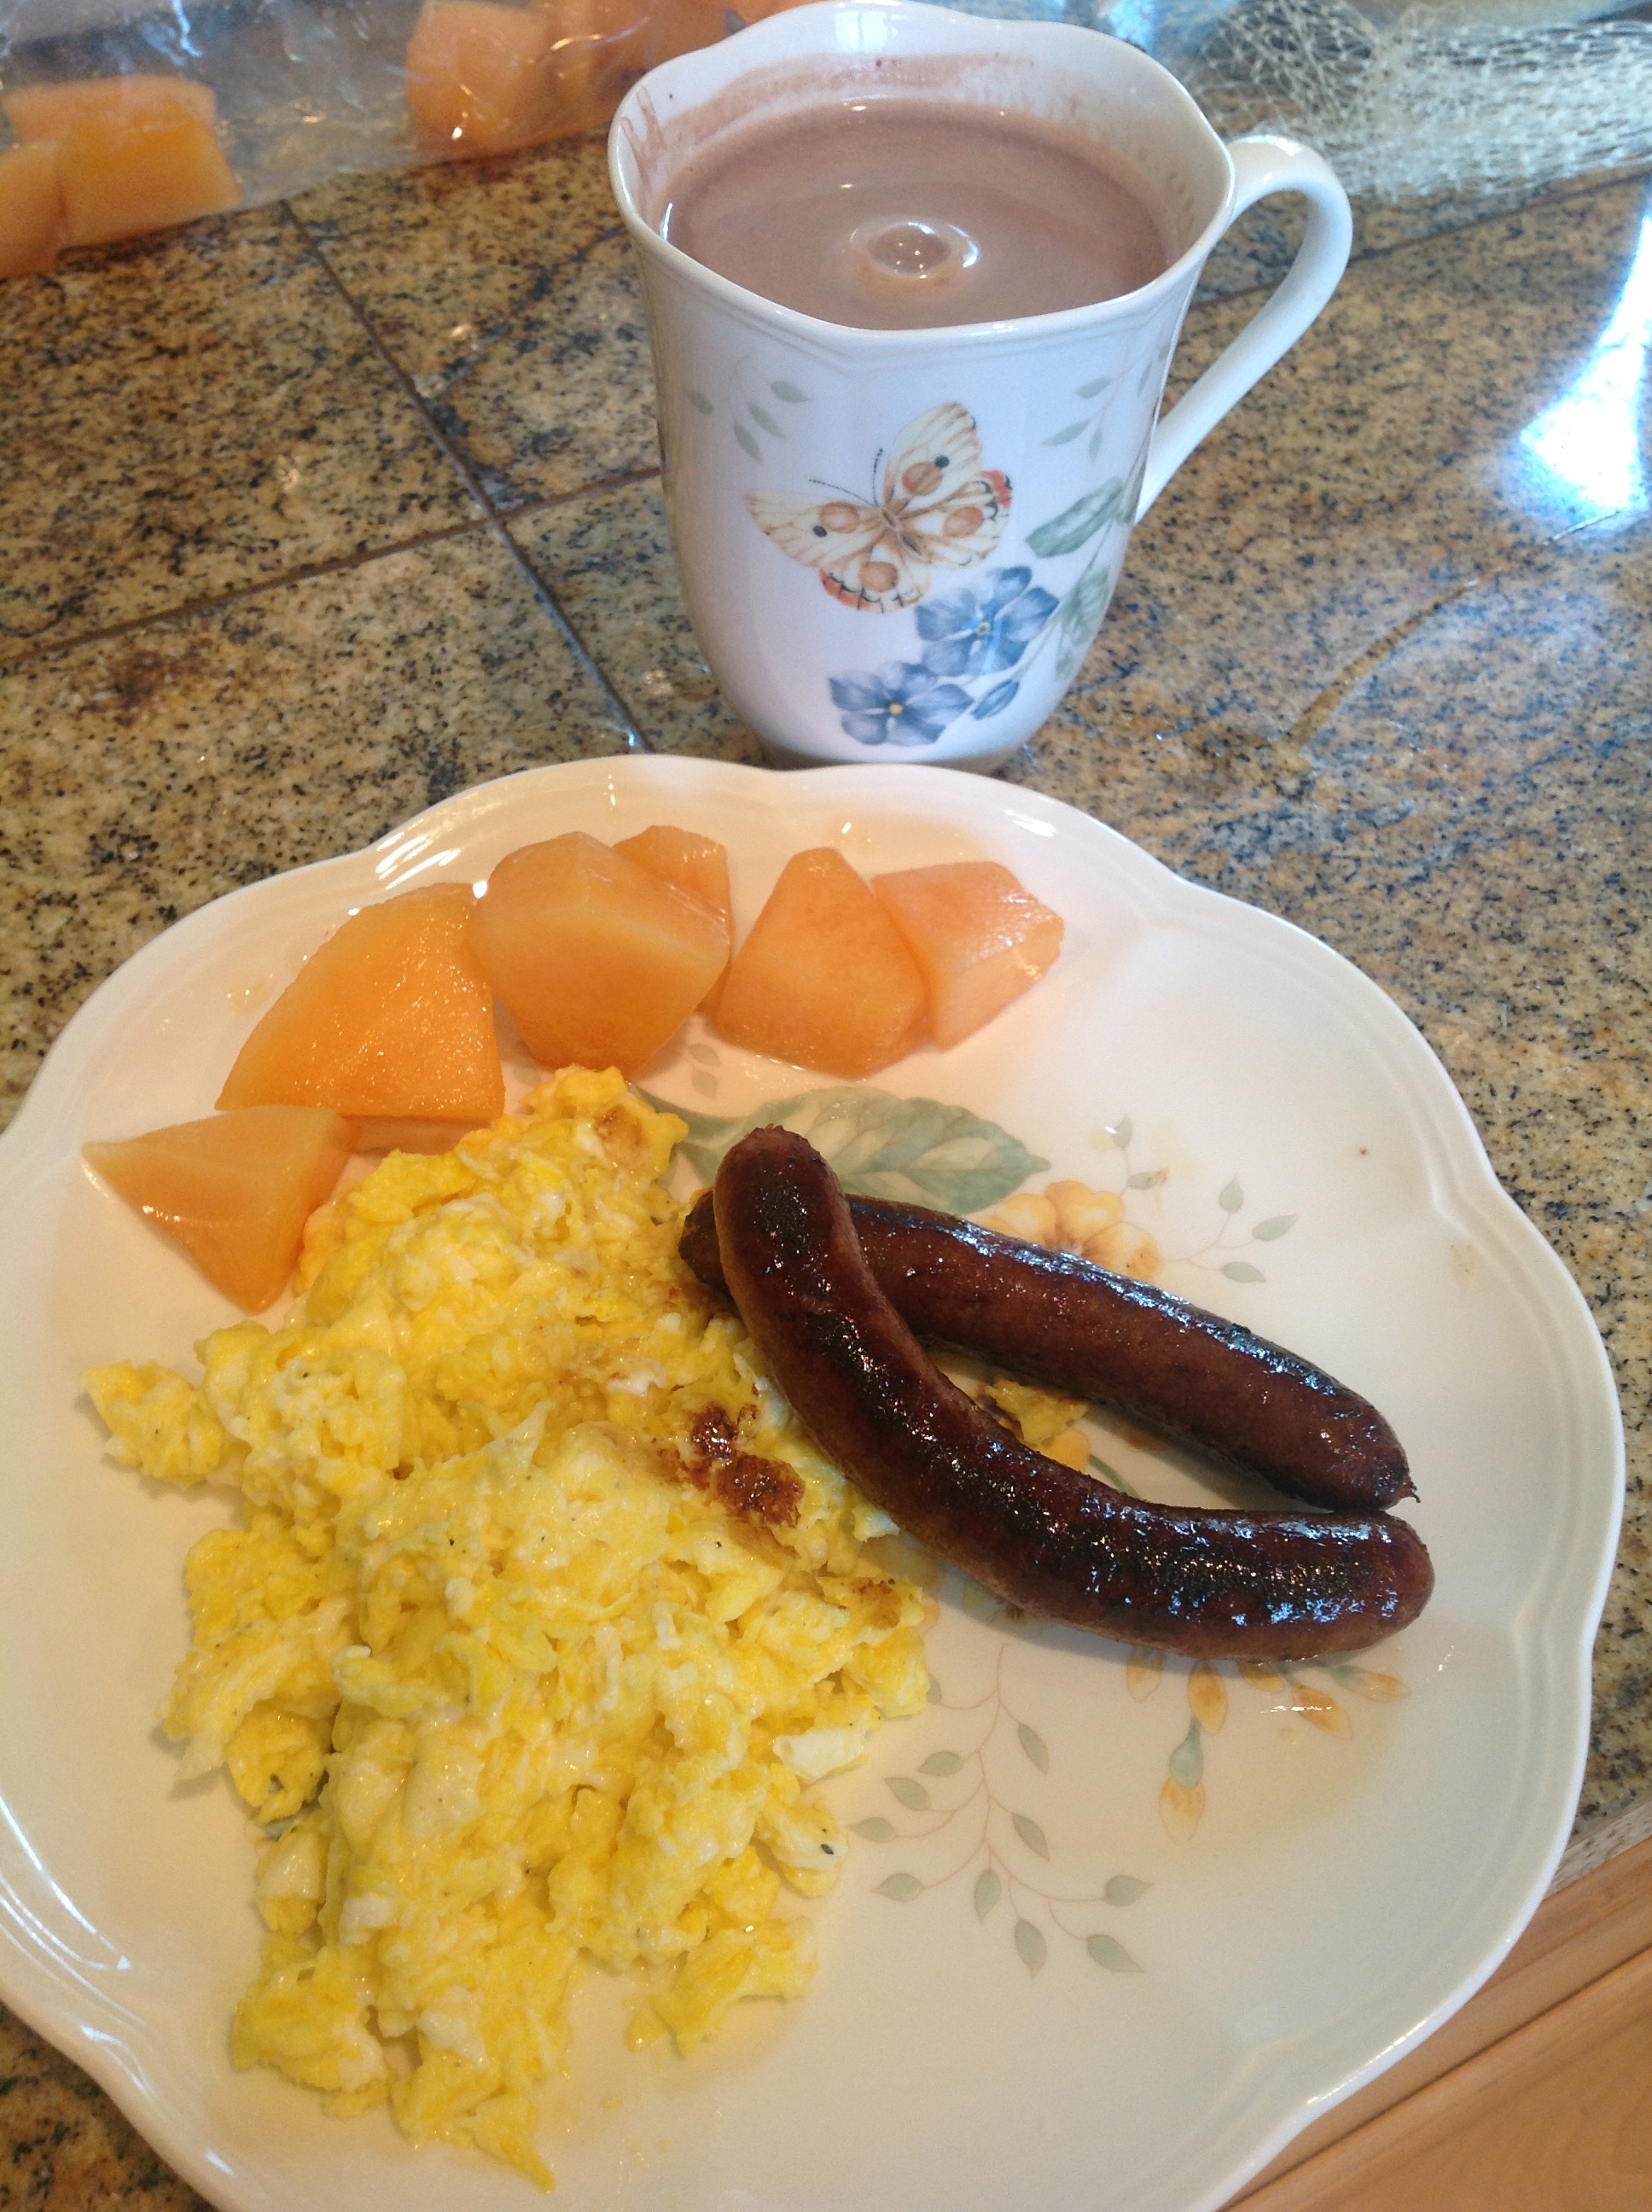 breakfast I prepared for Hubs (sausage,eggs,hot chocolate)